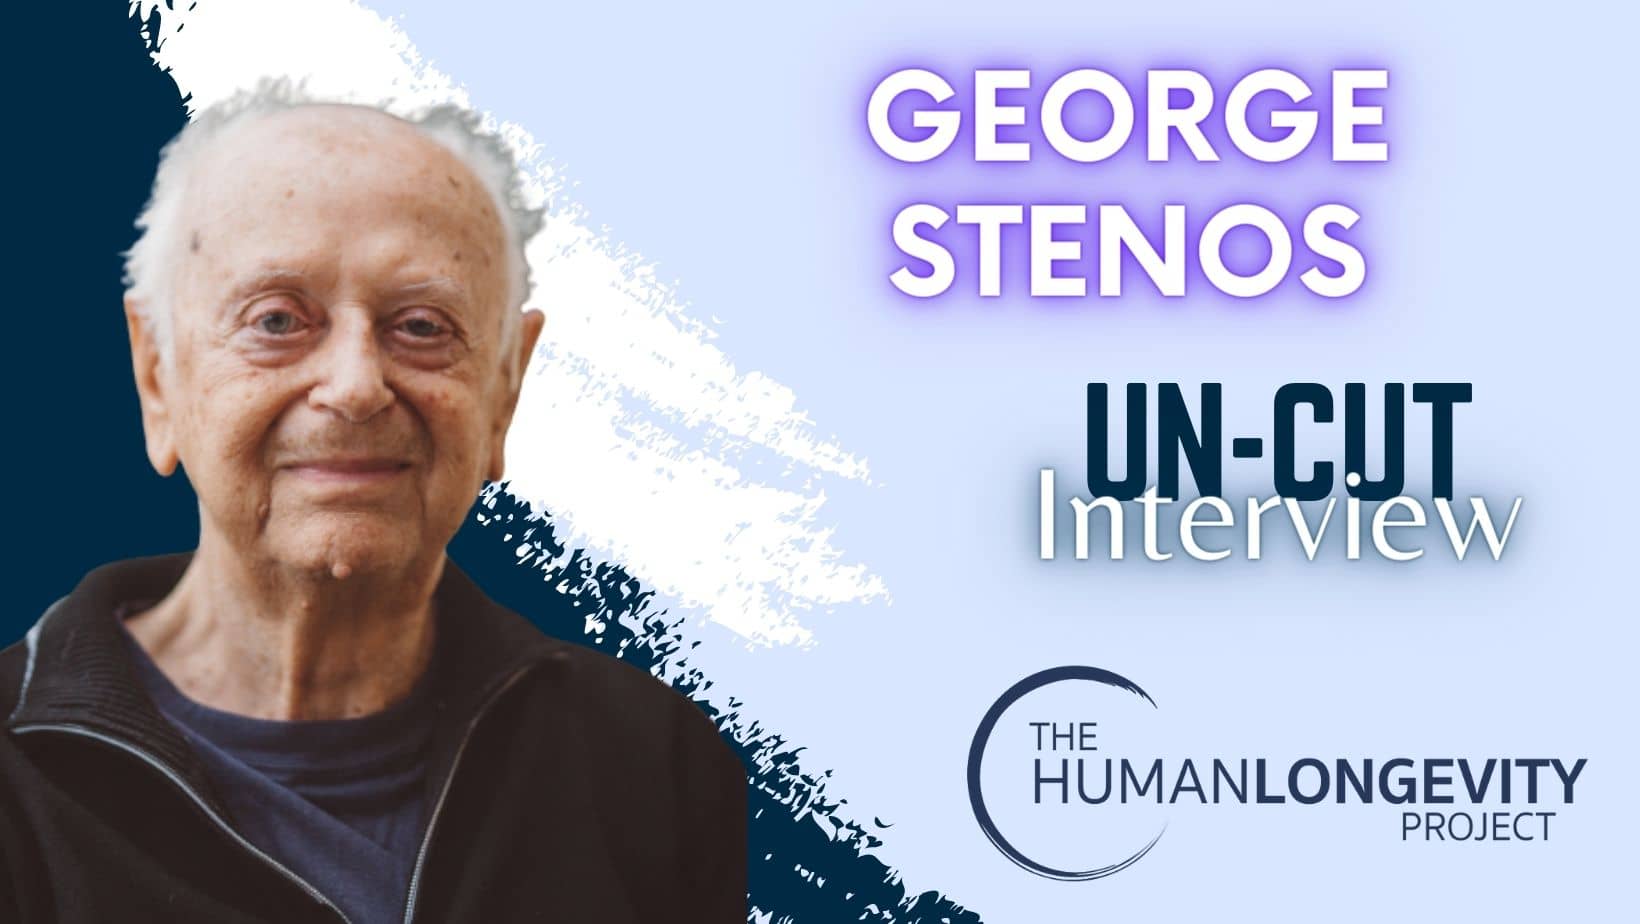 Human Longevity Project Uncut Interview With George Stenos